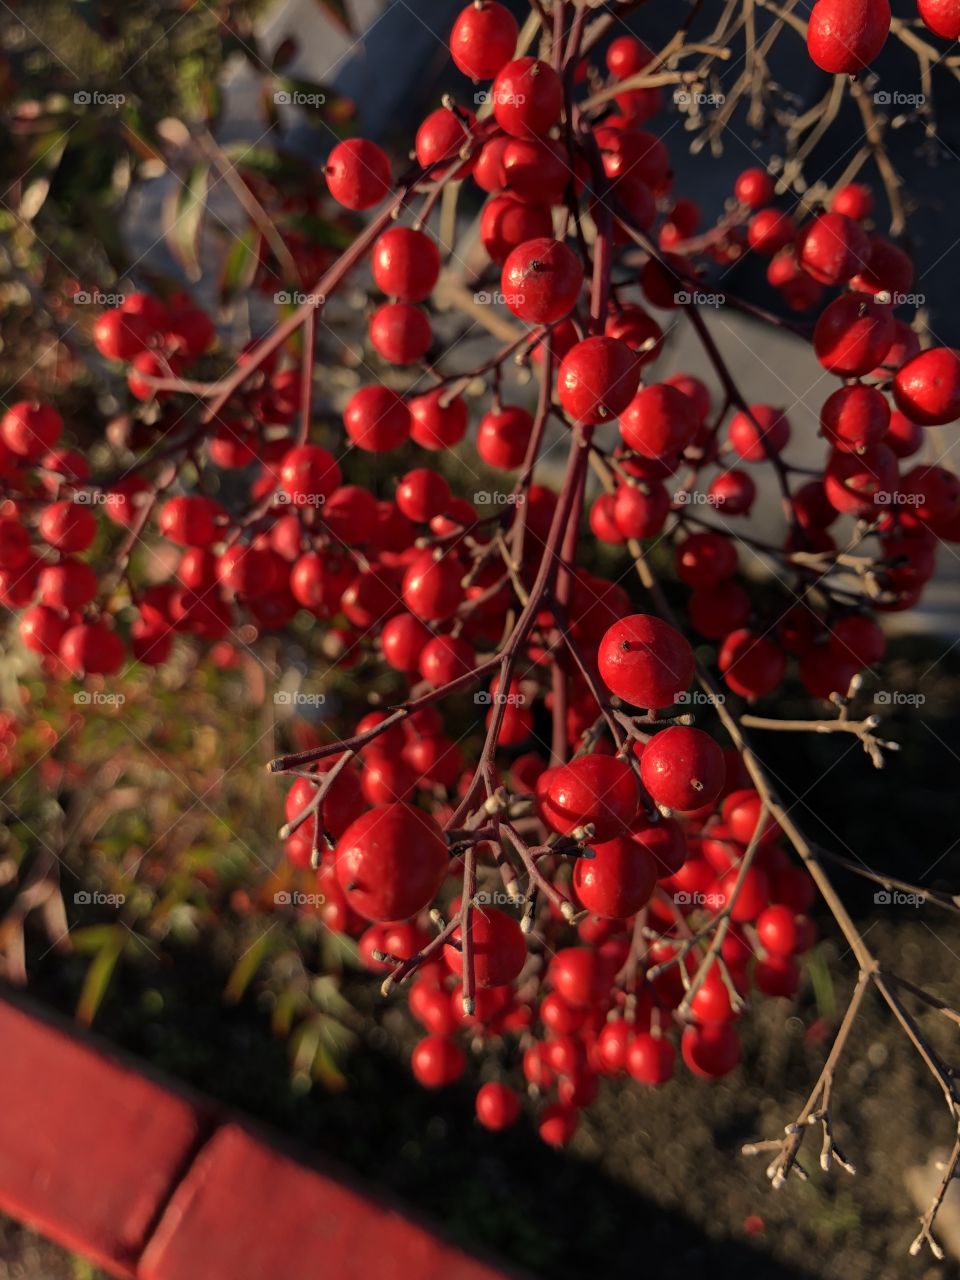 Bright red berries glow in the setting sun of a warm California evening. 